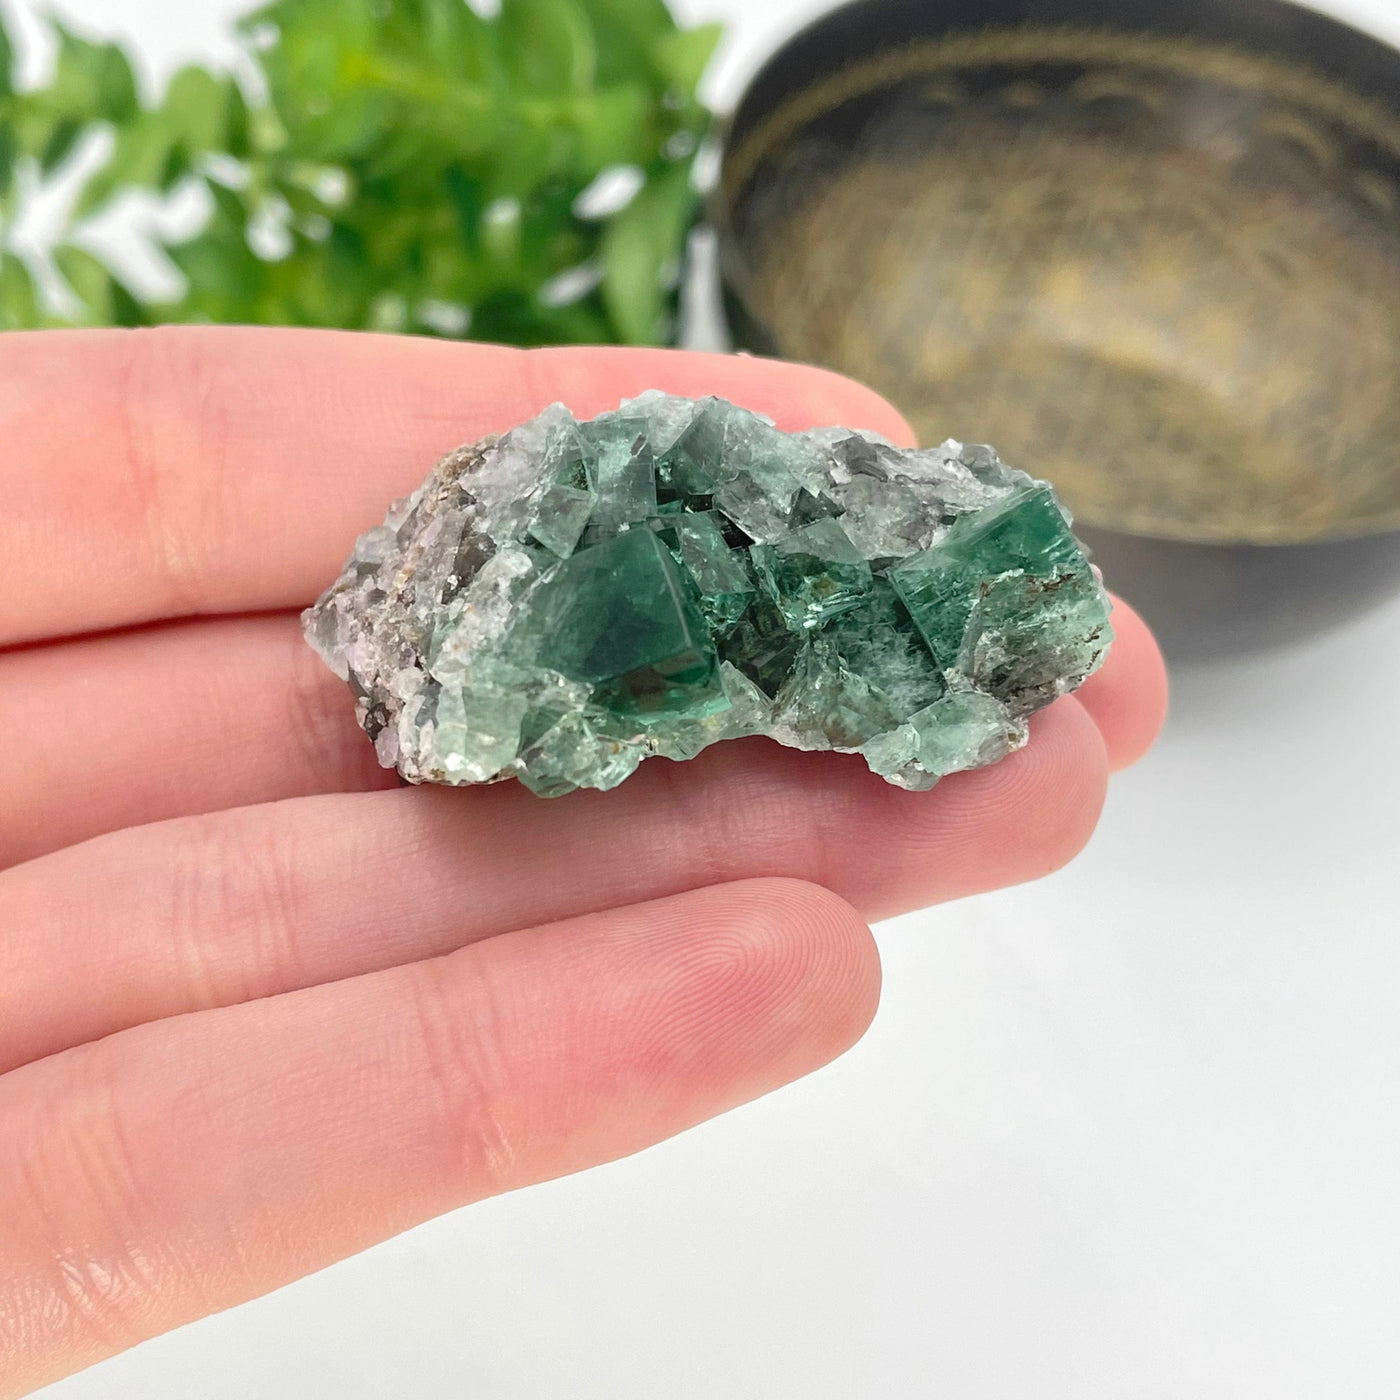 diana maria fluorite cluster in hand for size reference